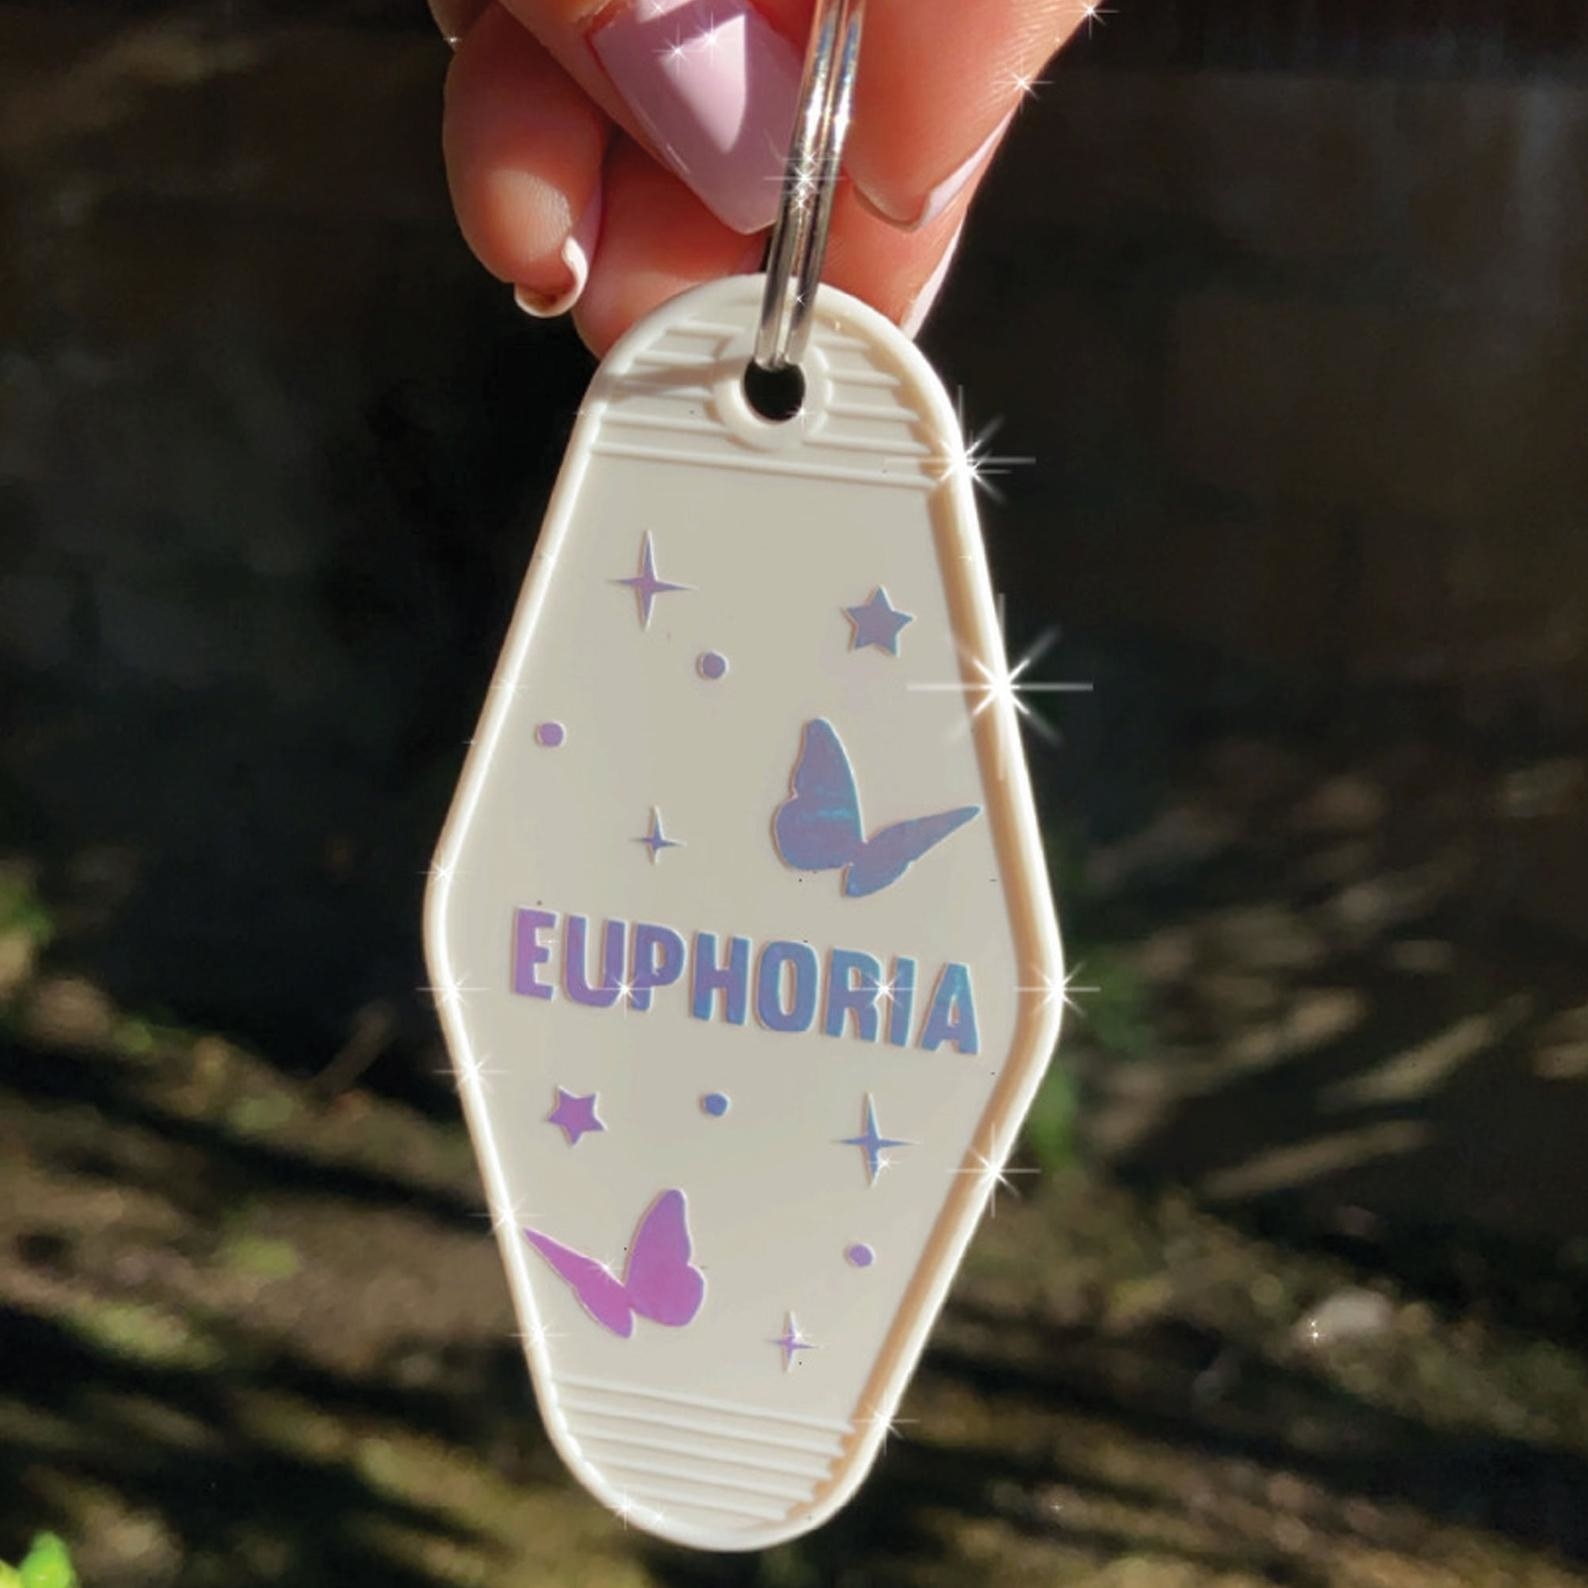 a hand dangles the euphoria holographic vintage keychain